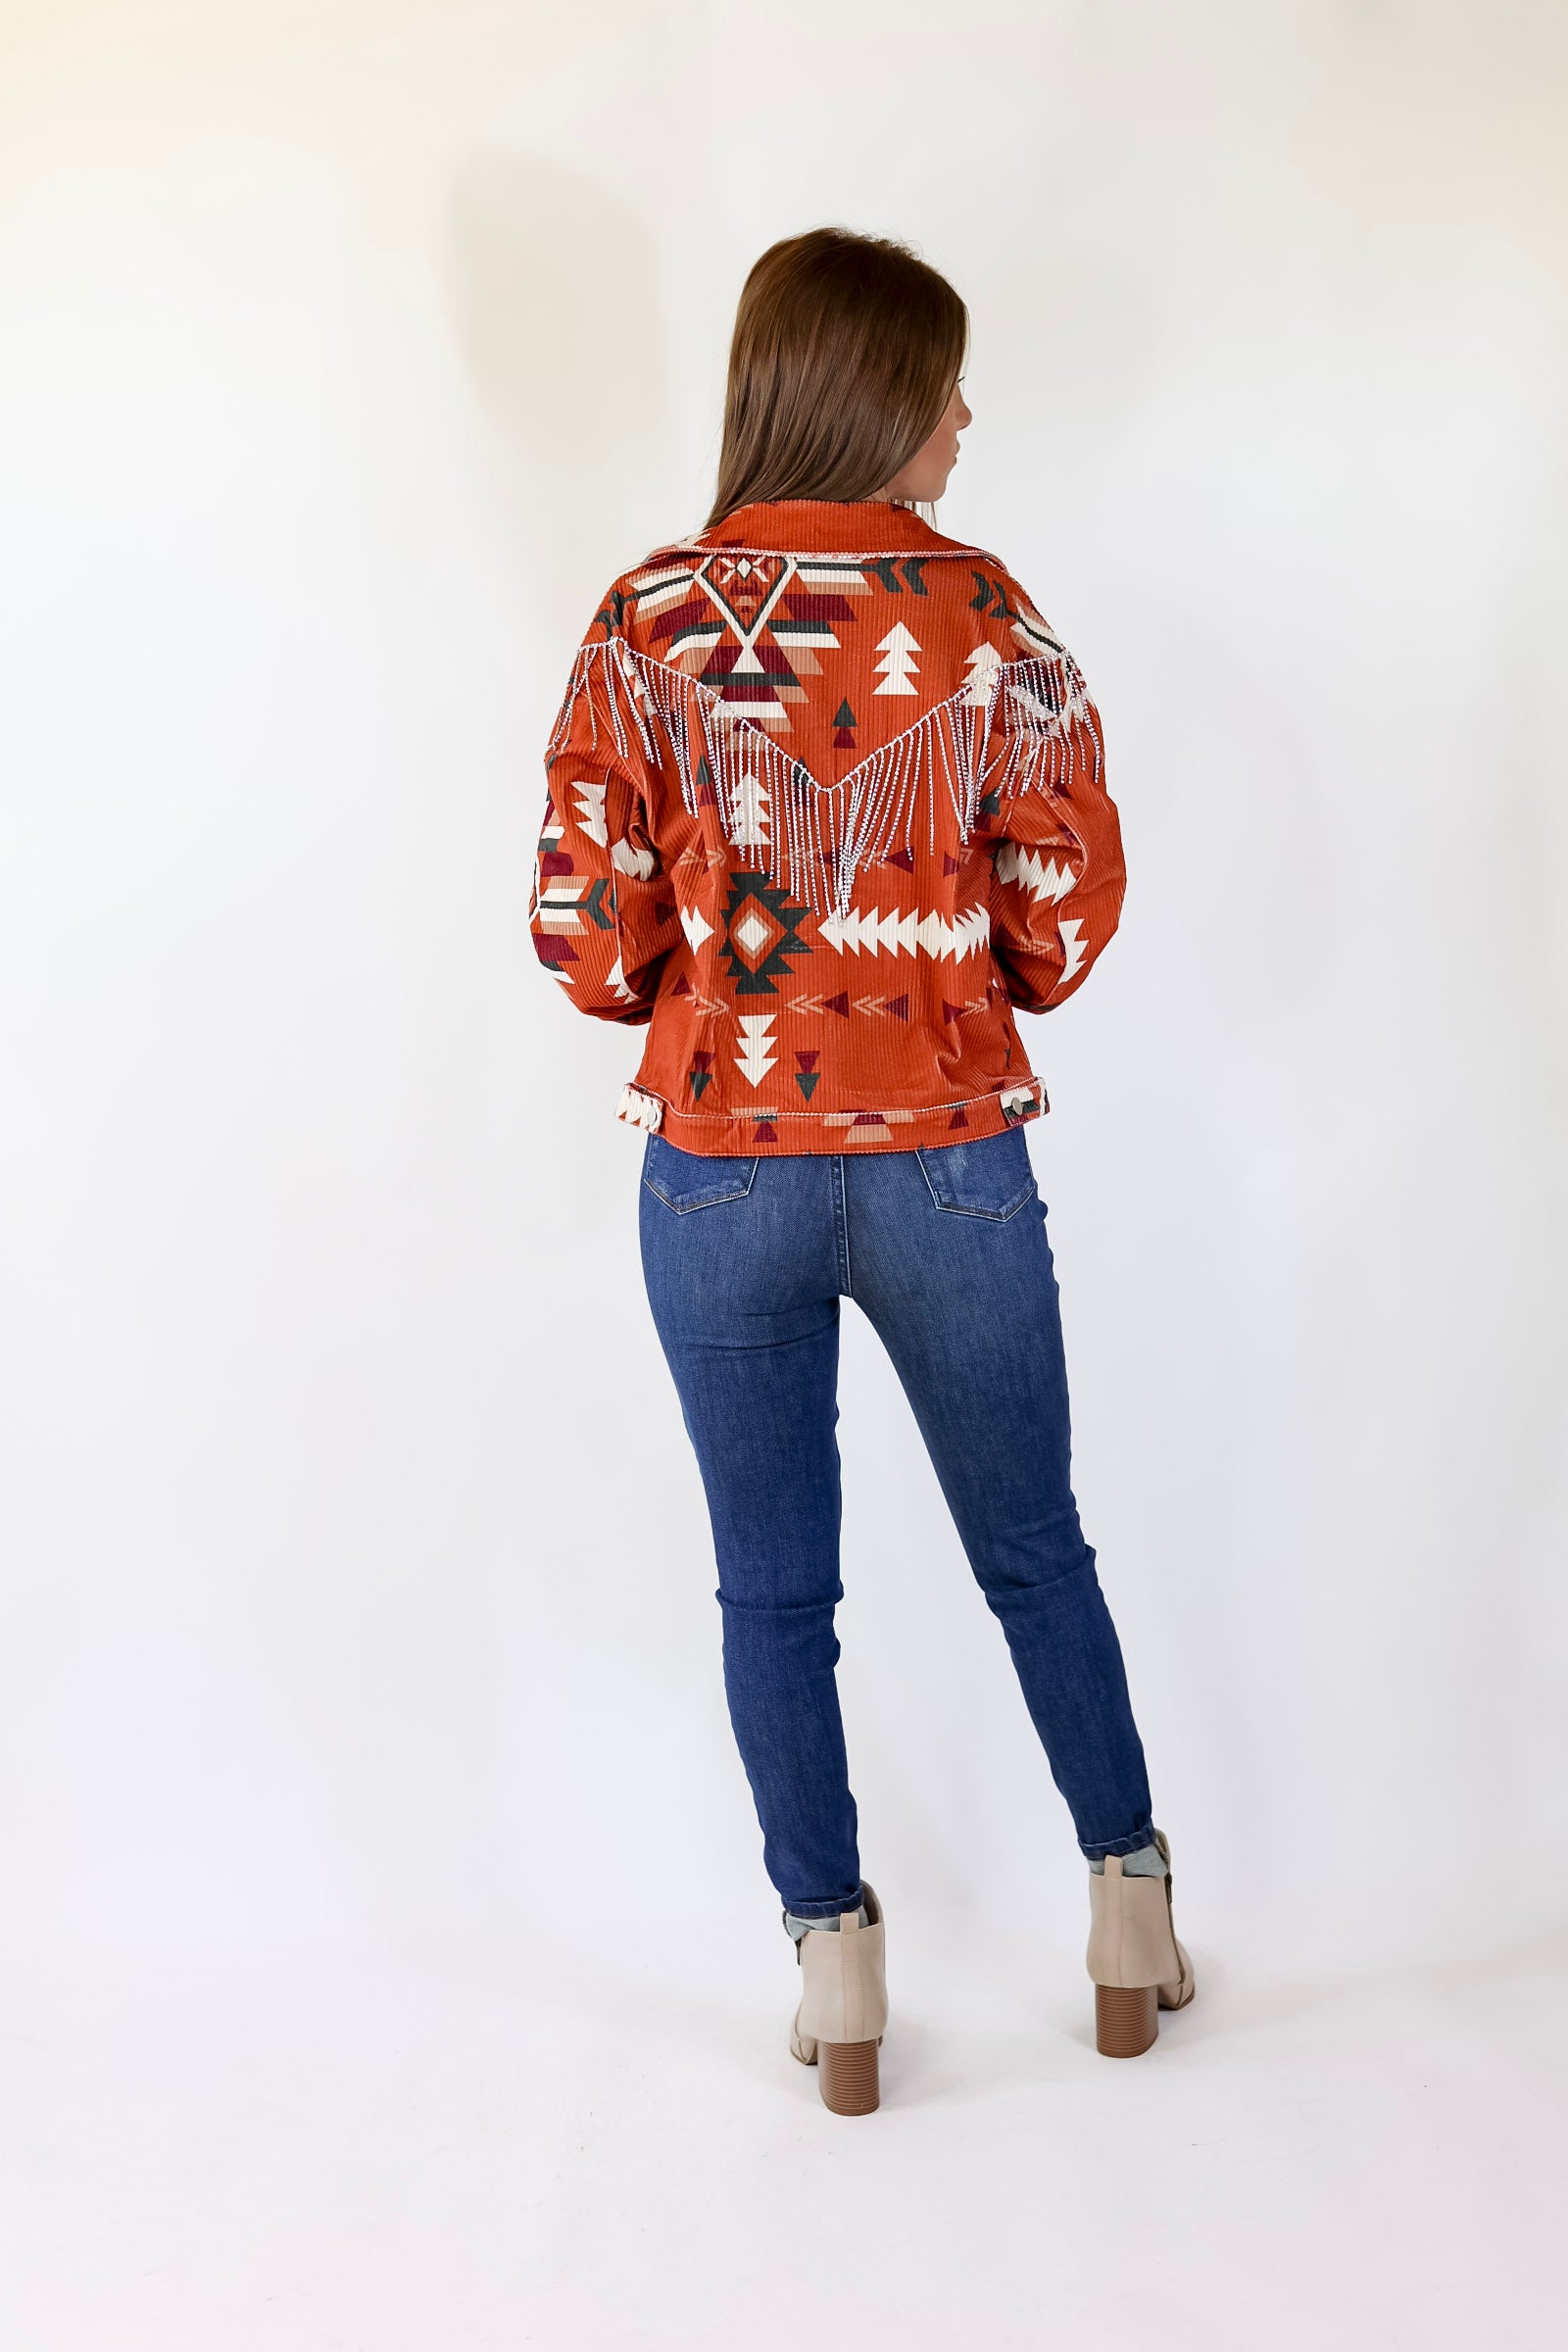 Signature Moves Aztec Print Jacket with Crystal Fringe in Rust Orange - Giddy Up Glamour Boutique